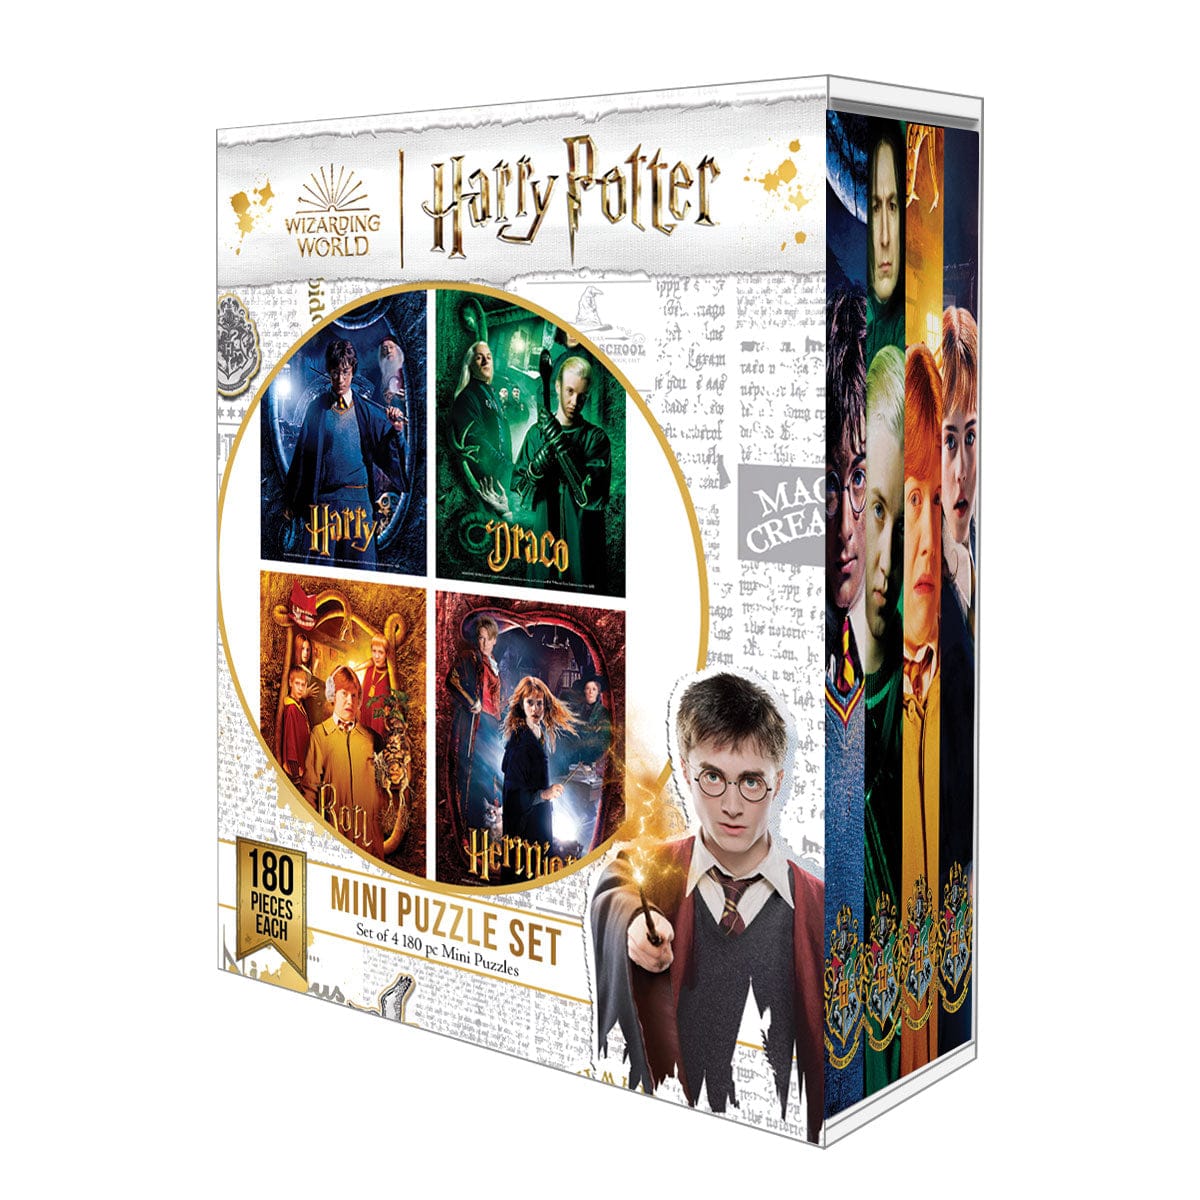 Harry Potter Movie Scene 13 x 19 Action Figure Backdrop Photo Poster 04 -  Gold Record Outlet Album and Disc Collectible Memorabilia